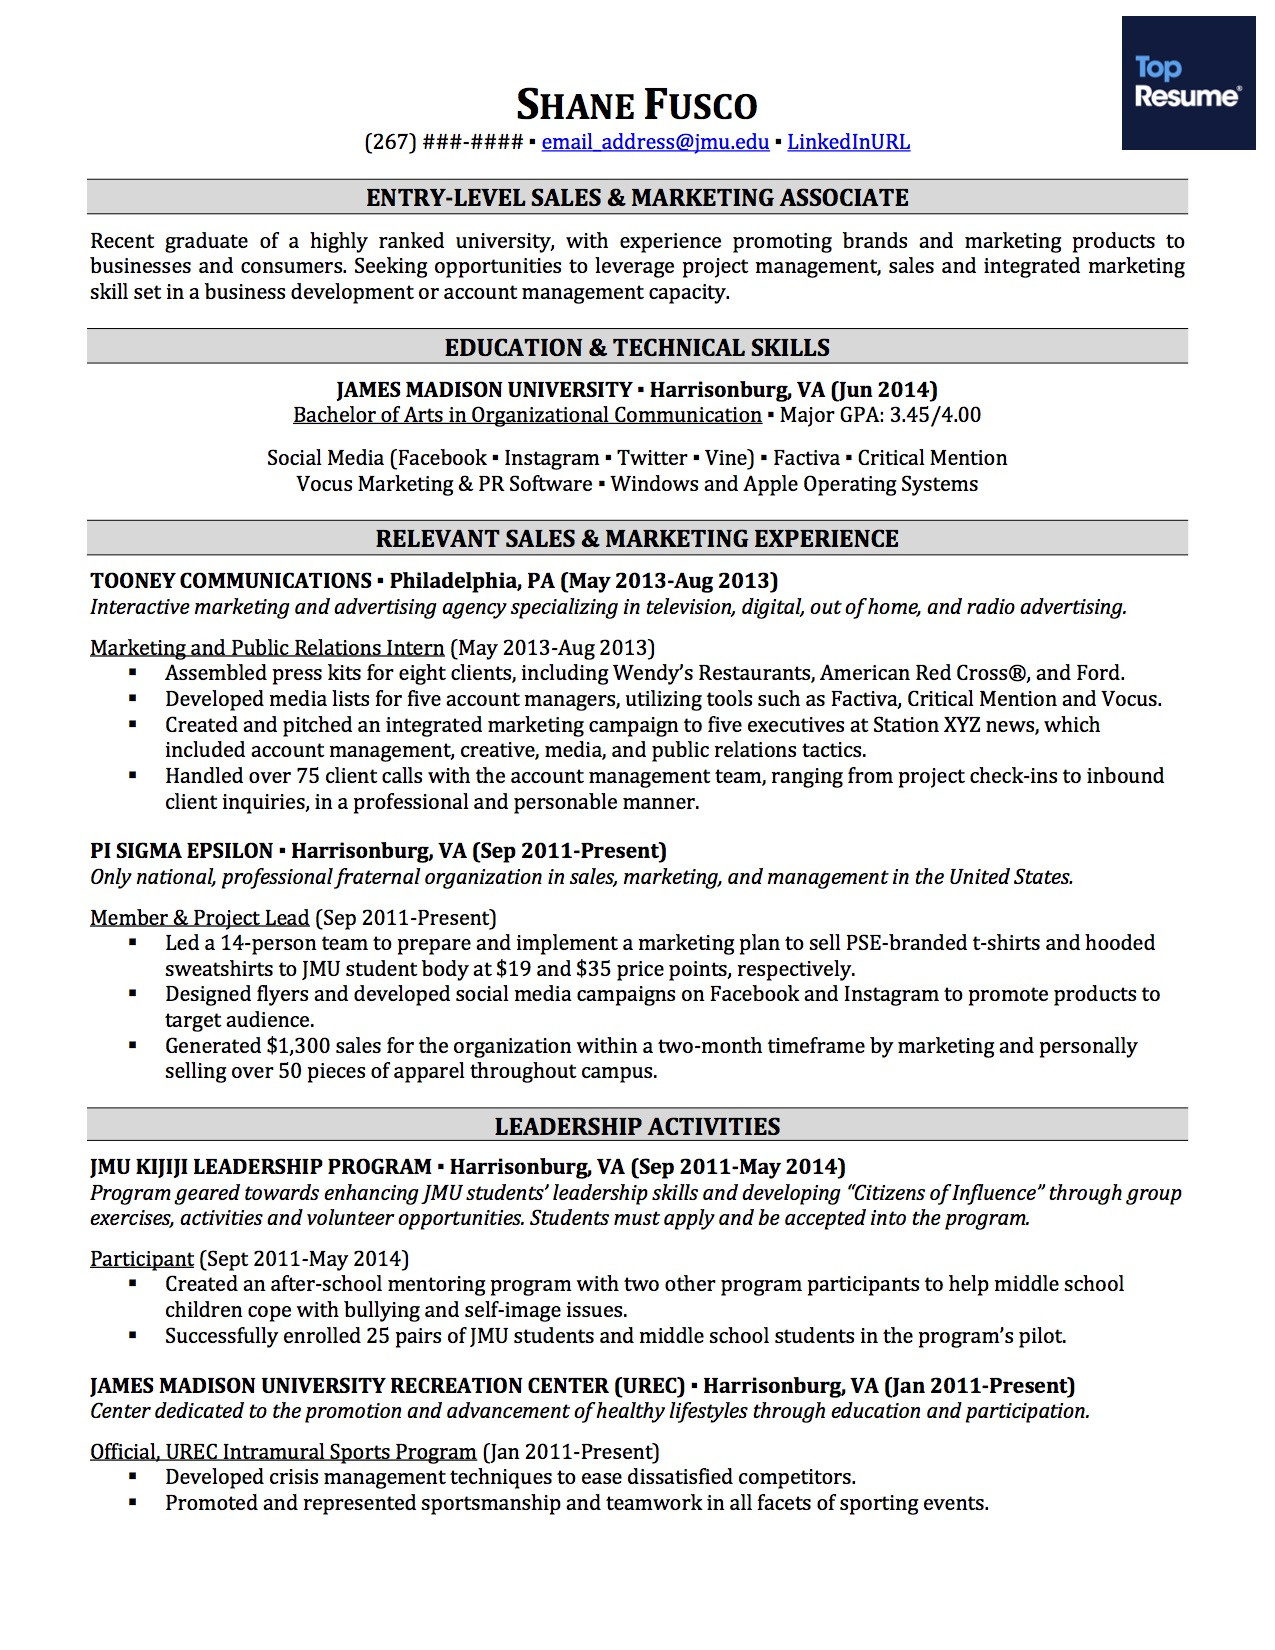 Sample Resume for Jobs with No Experience How to Make A Great Resume with No Experience topresume